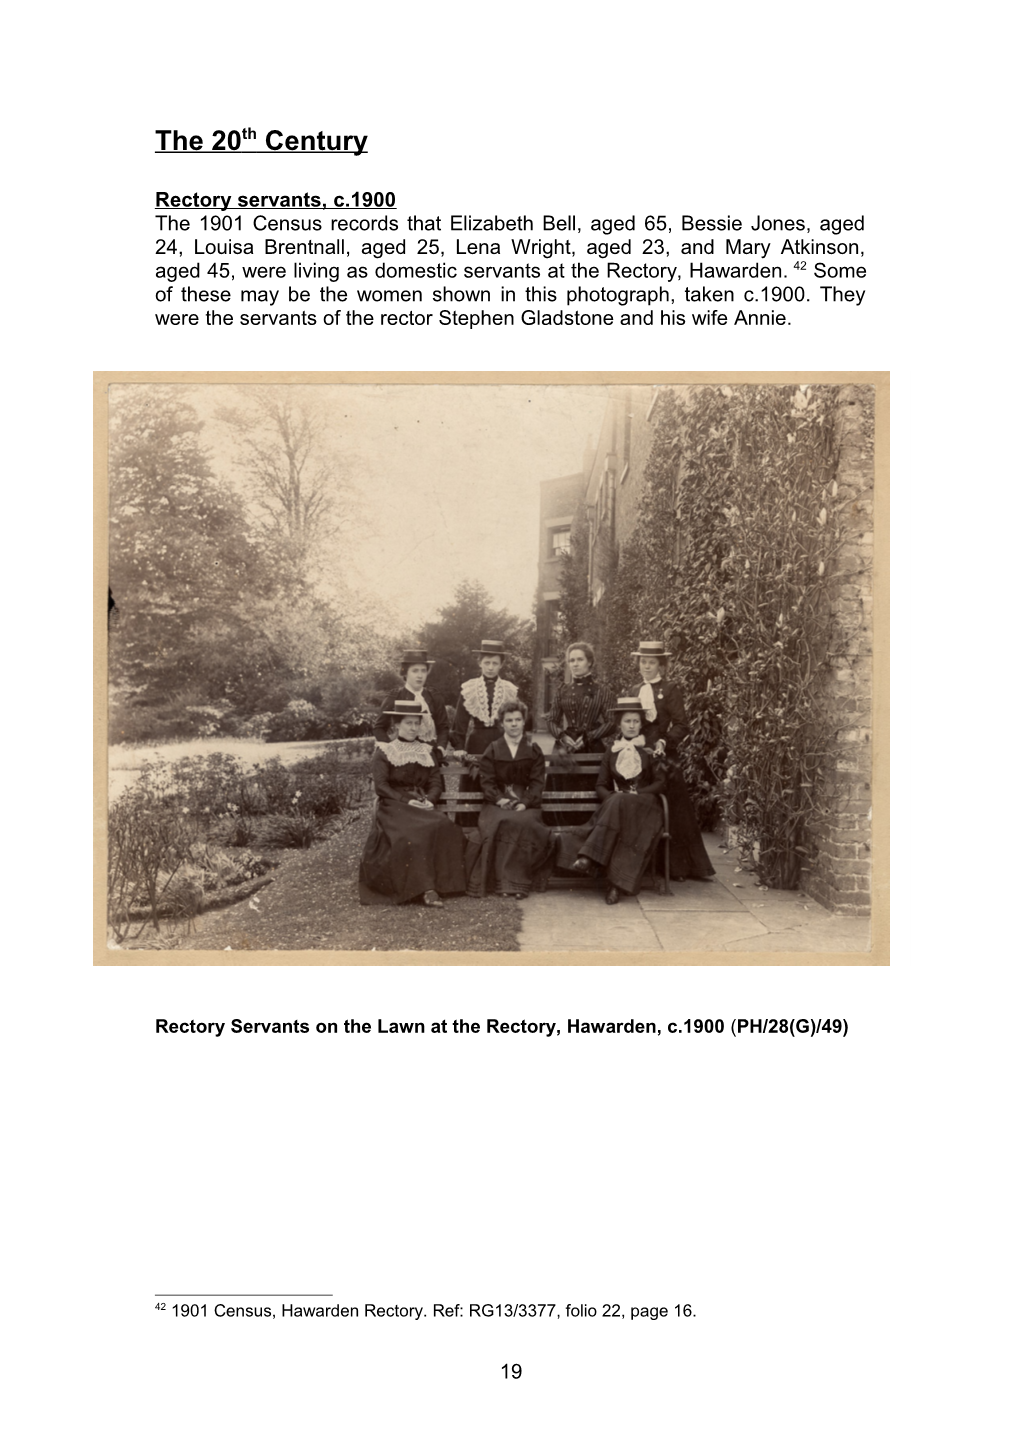 Brief History of Old Rectory